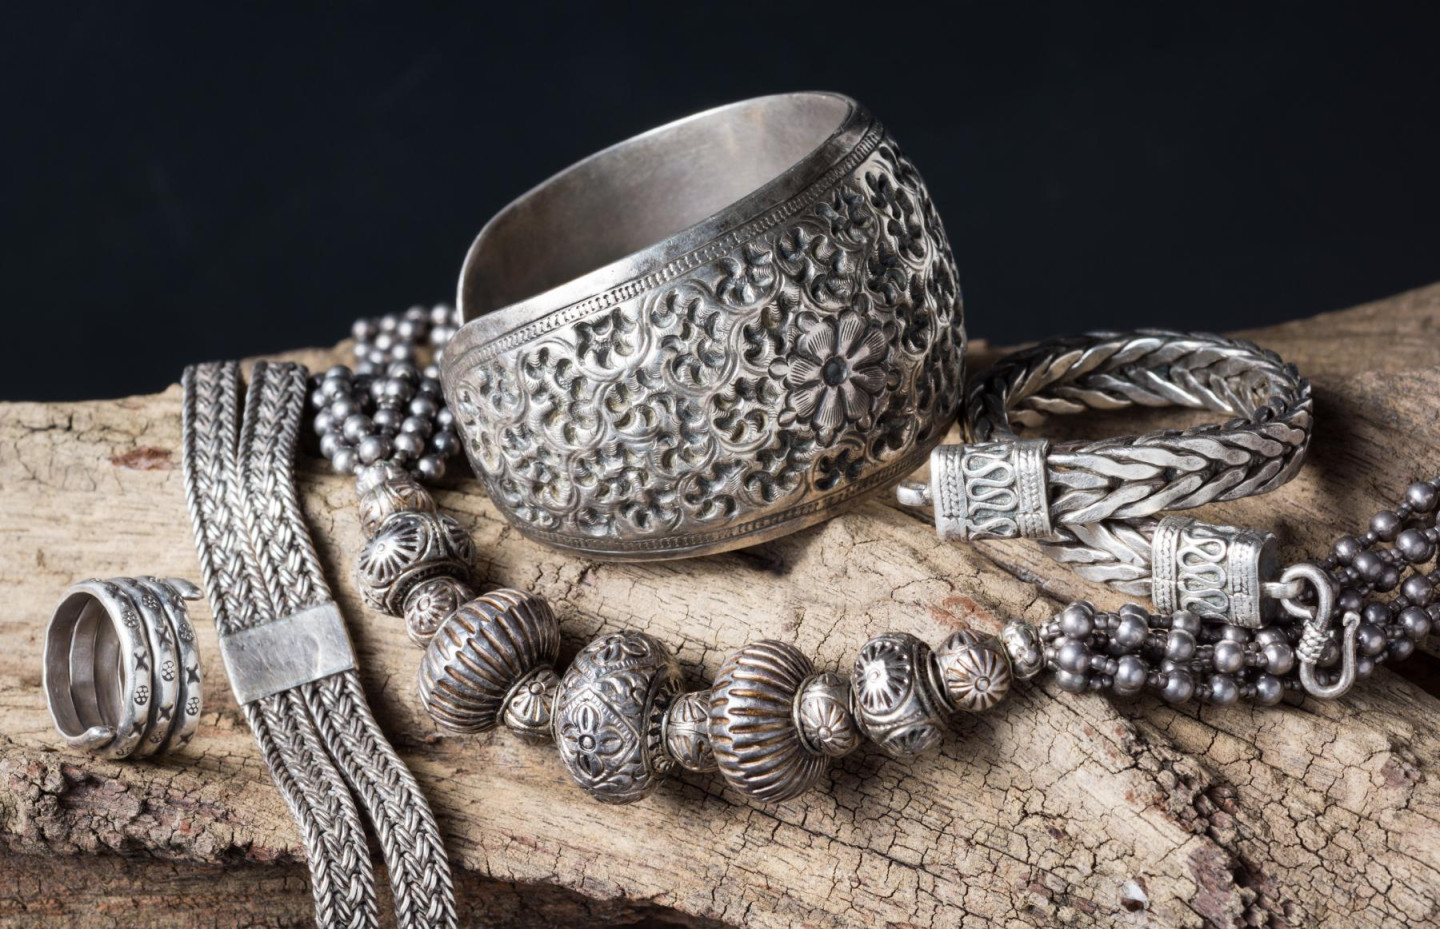 How to check silver for authenticity and distinguish it from other metals